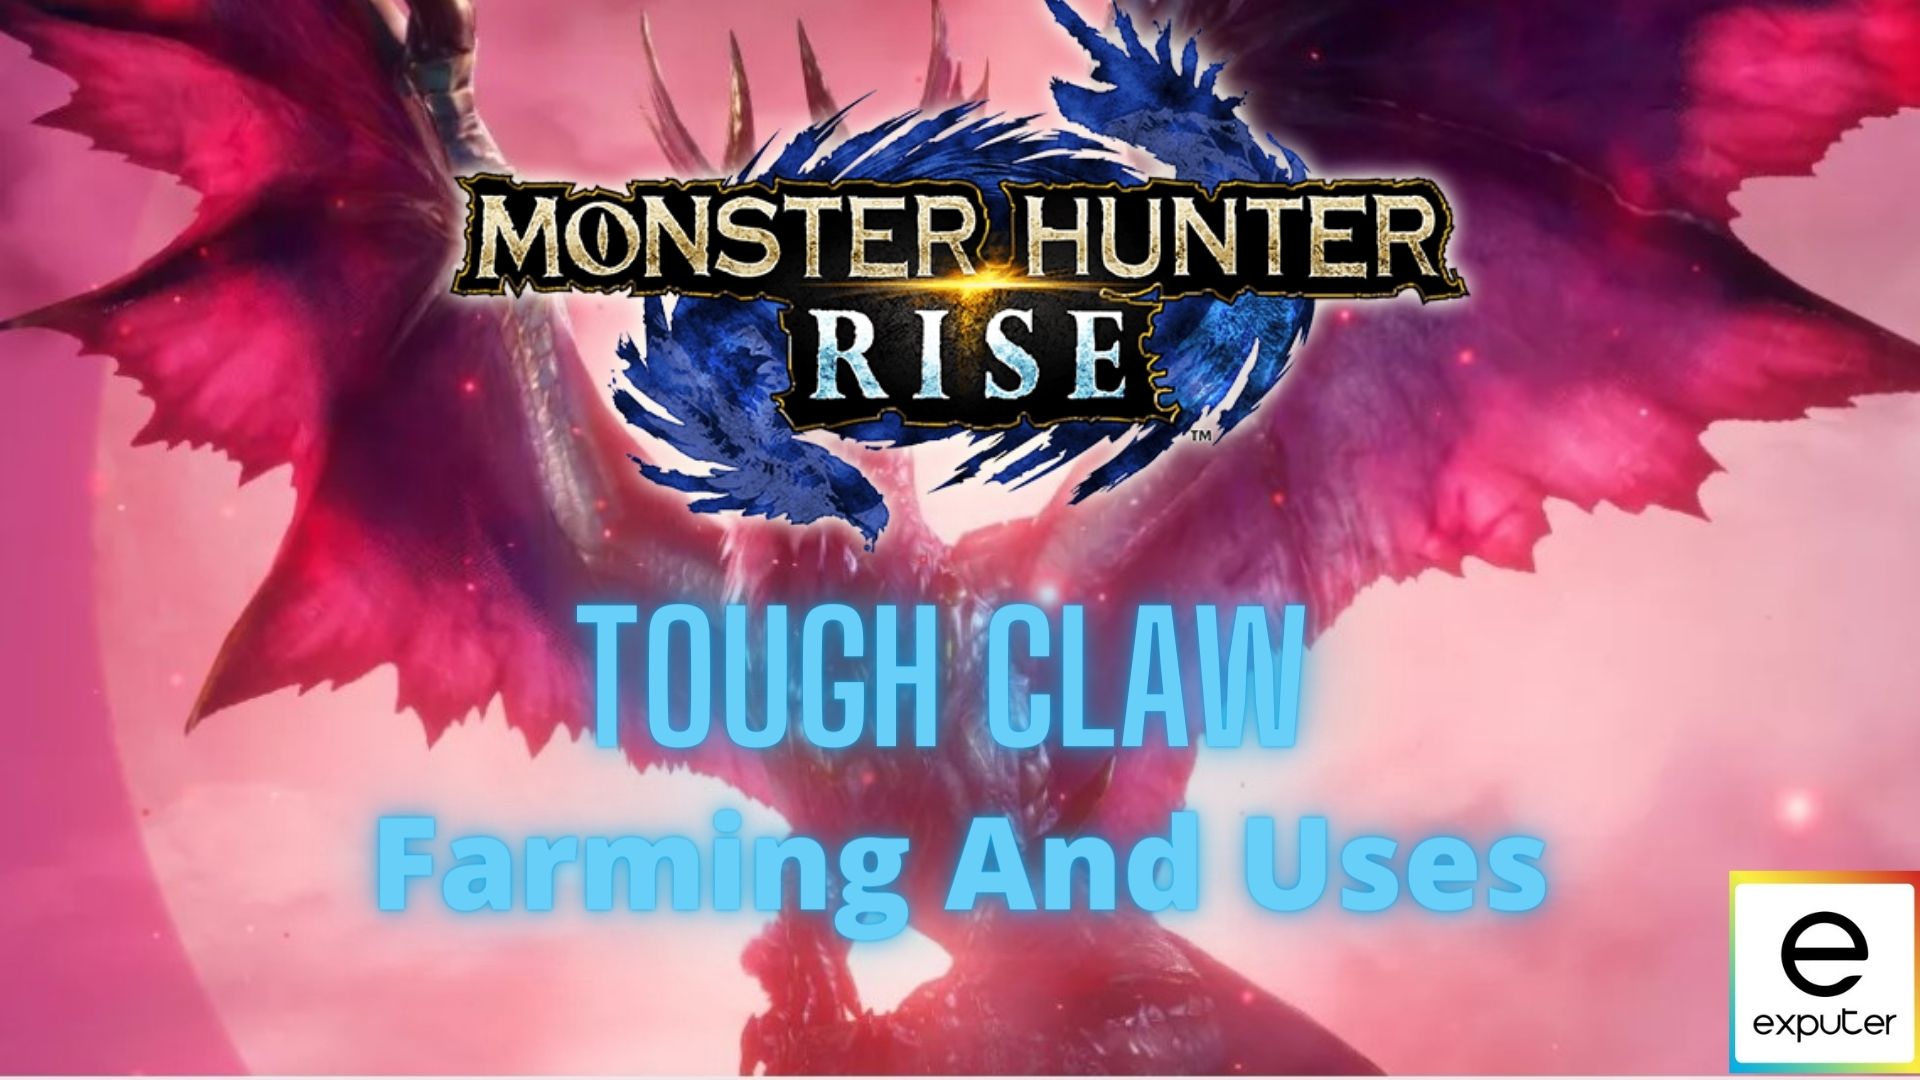 Tough Claw In Monster Hunter Rise